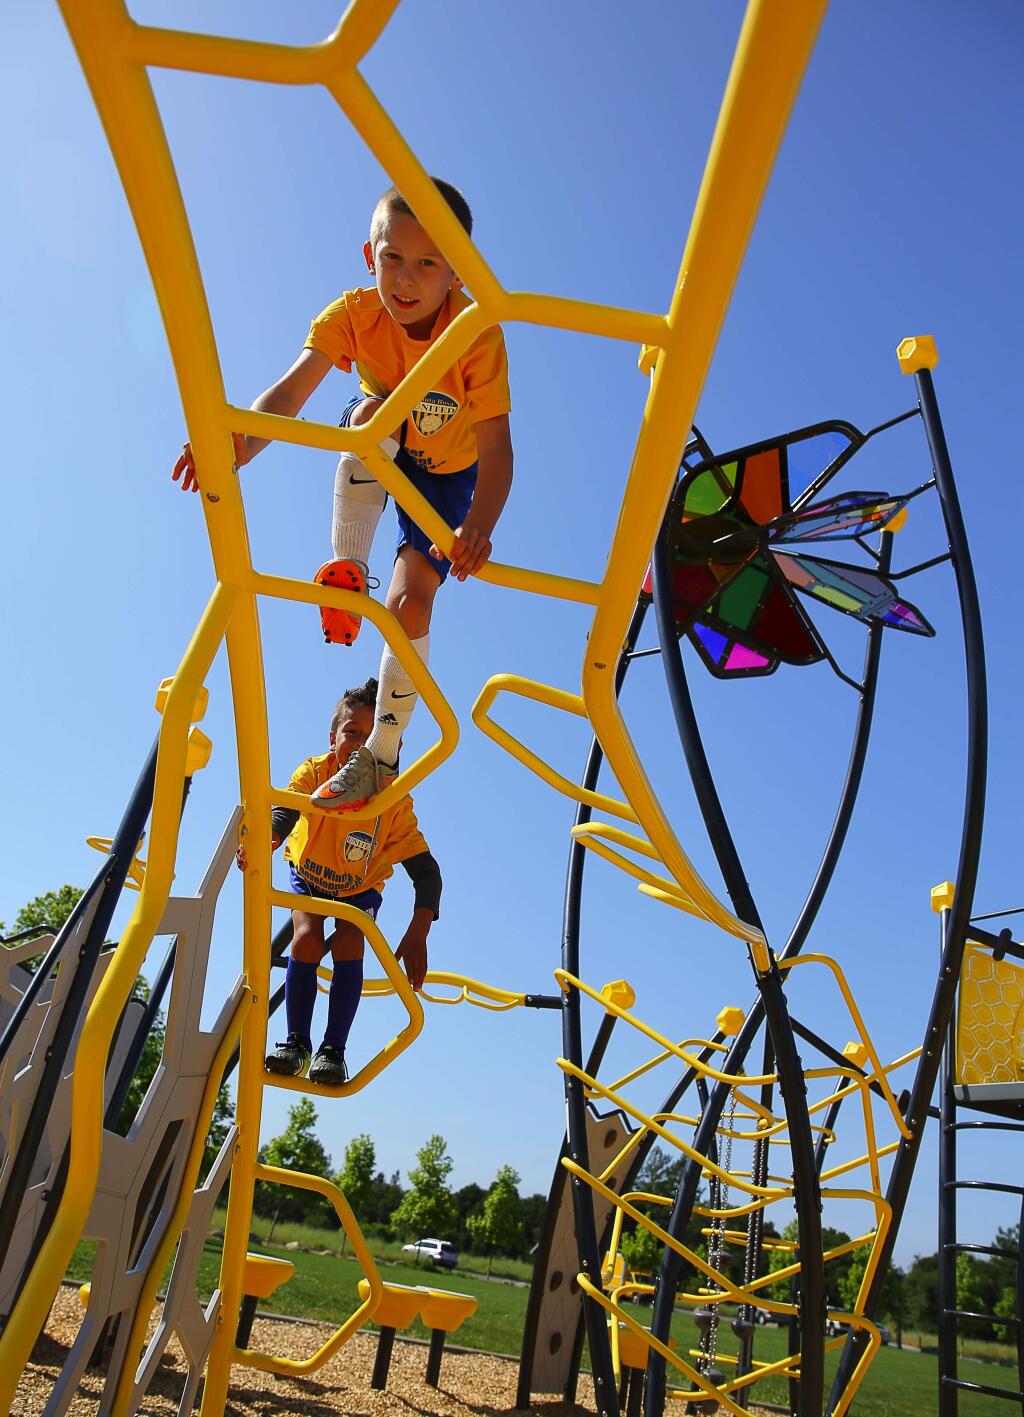 Cooper Gmitter, top, and Maximus Castillo, both 6, climb on top of the playground structure at A Place to Play park in Santa Rosa. (Christopher Chung/ The Press Democrat)